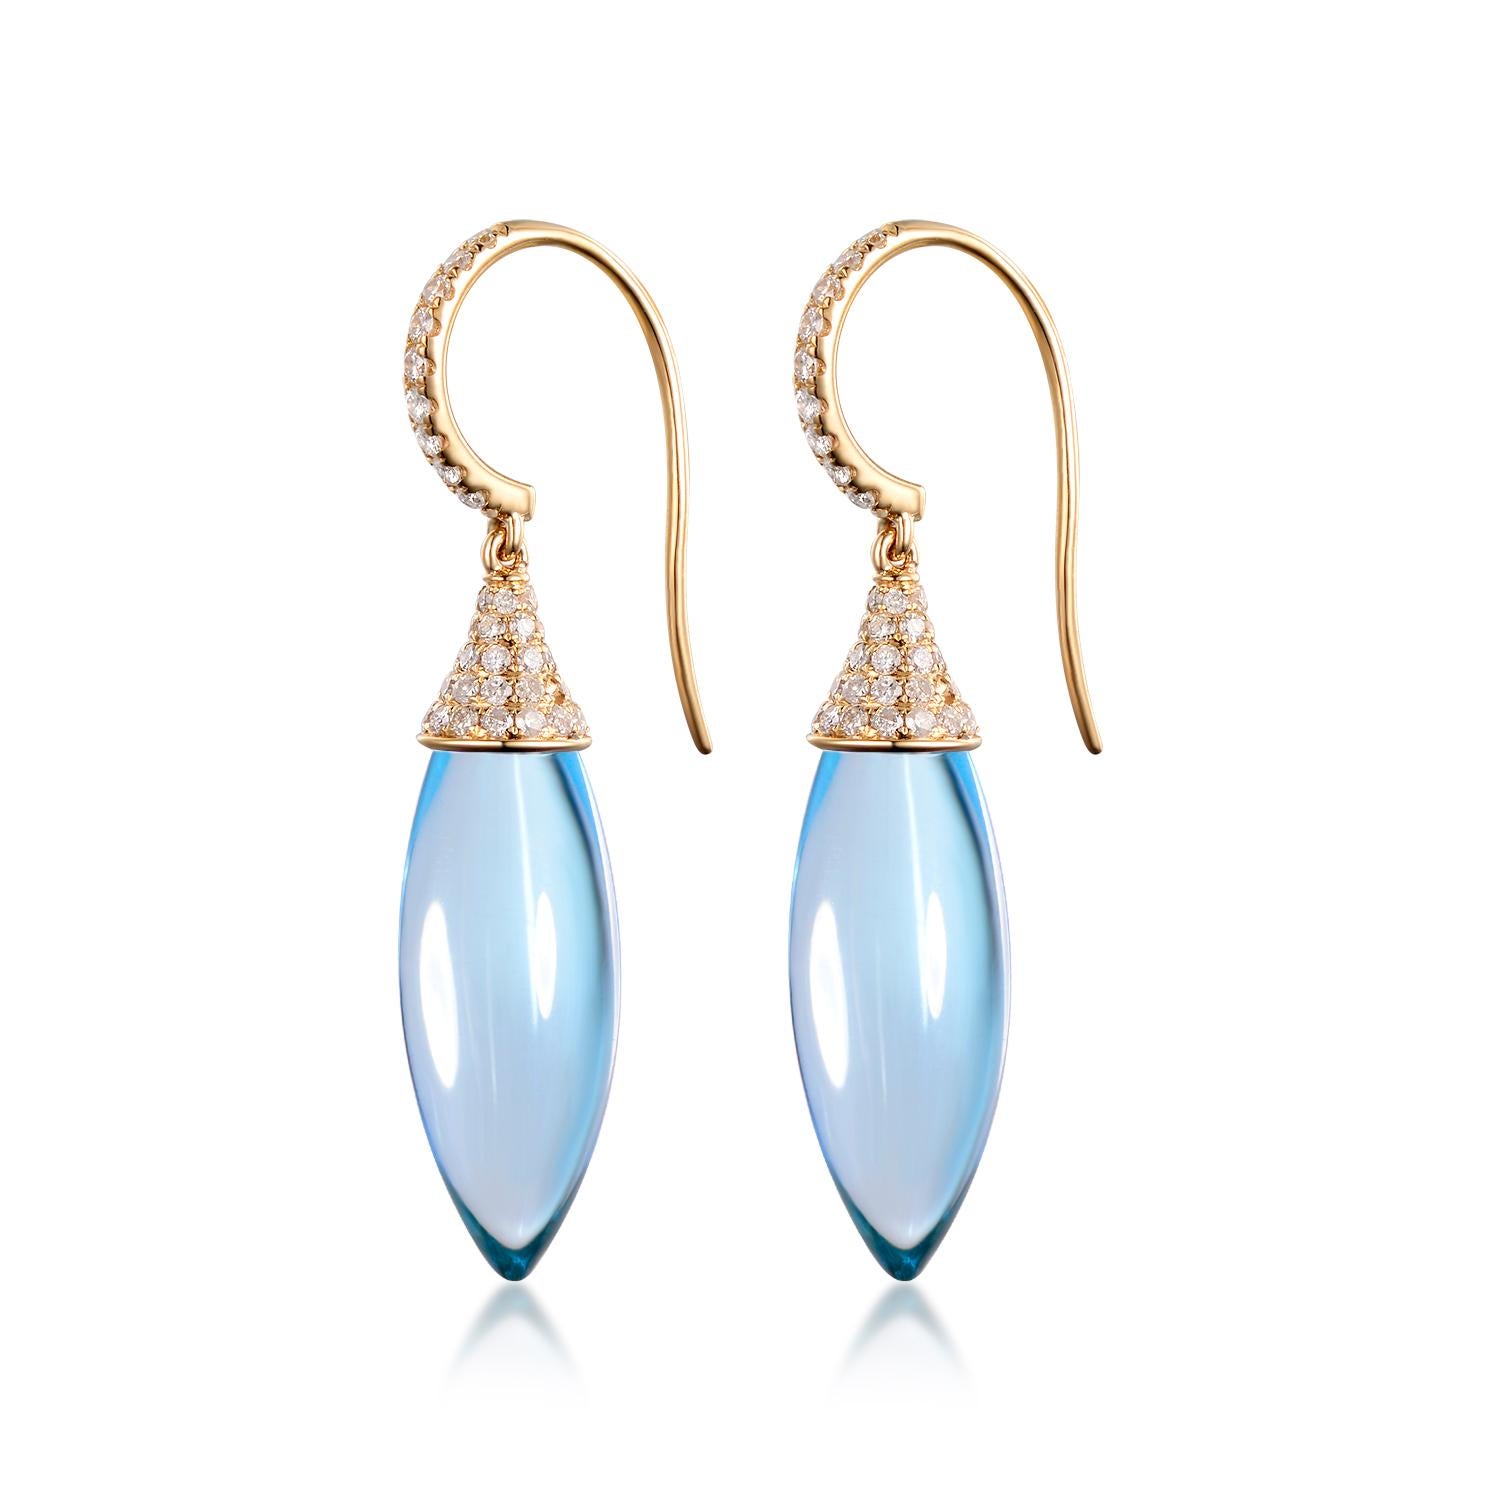 Introducing our exquisite Blue Topaz Drop Earrings, a stunning combination of elegance and sparkle. These captivating earrings feature a total of 25.29 carats of blue topaz, accented with 0.75 carats of brilliant white round diamonds at the